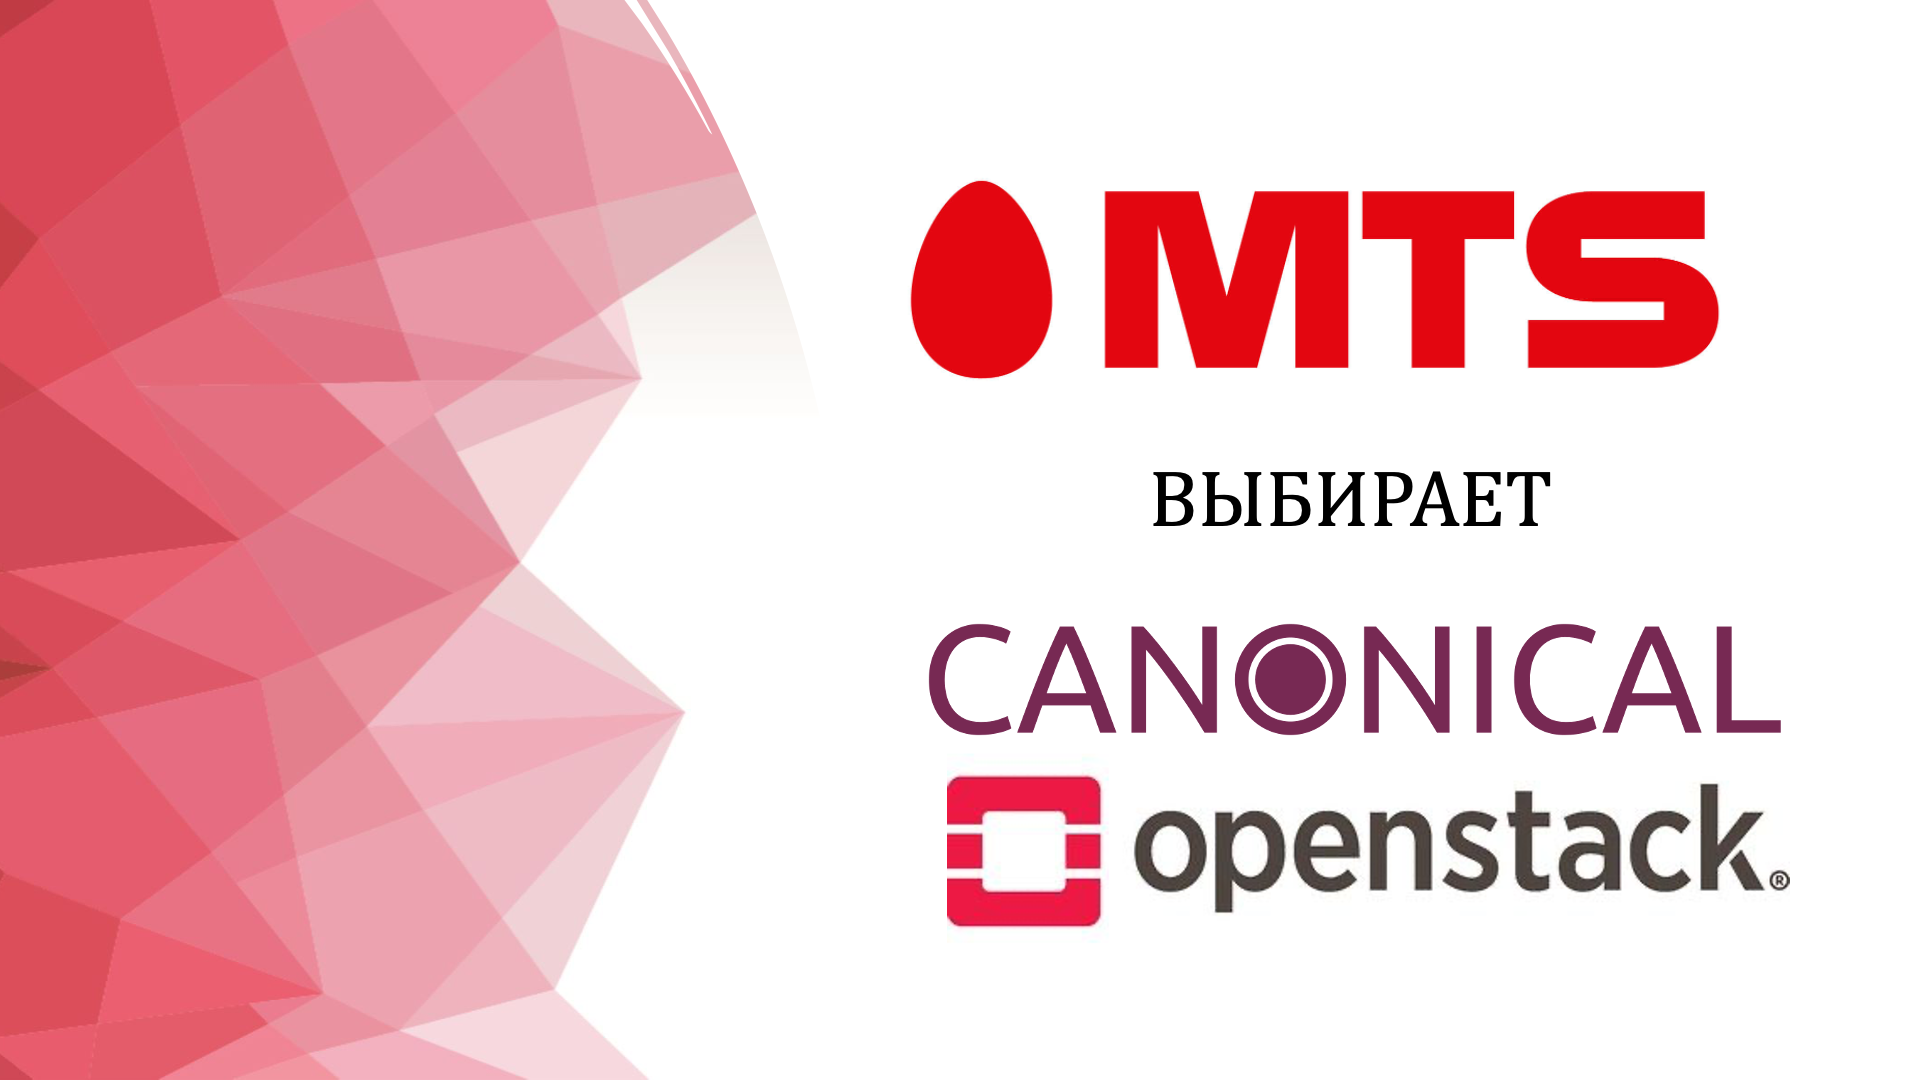 MTS выбрал Canonical Openstack